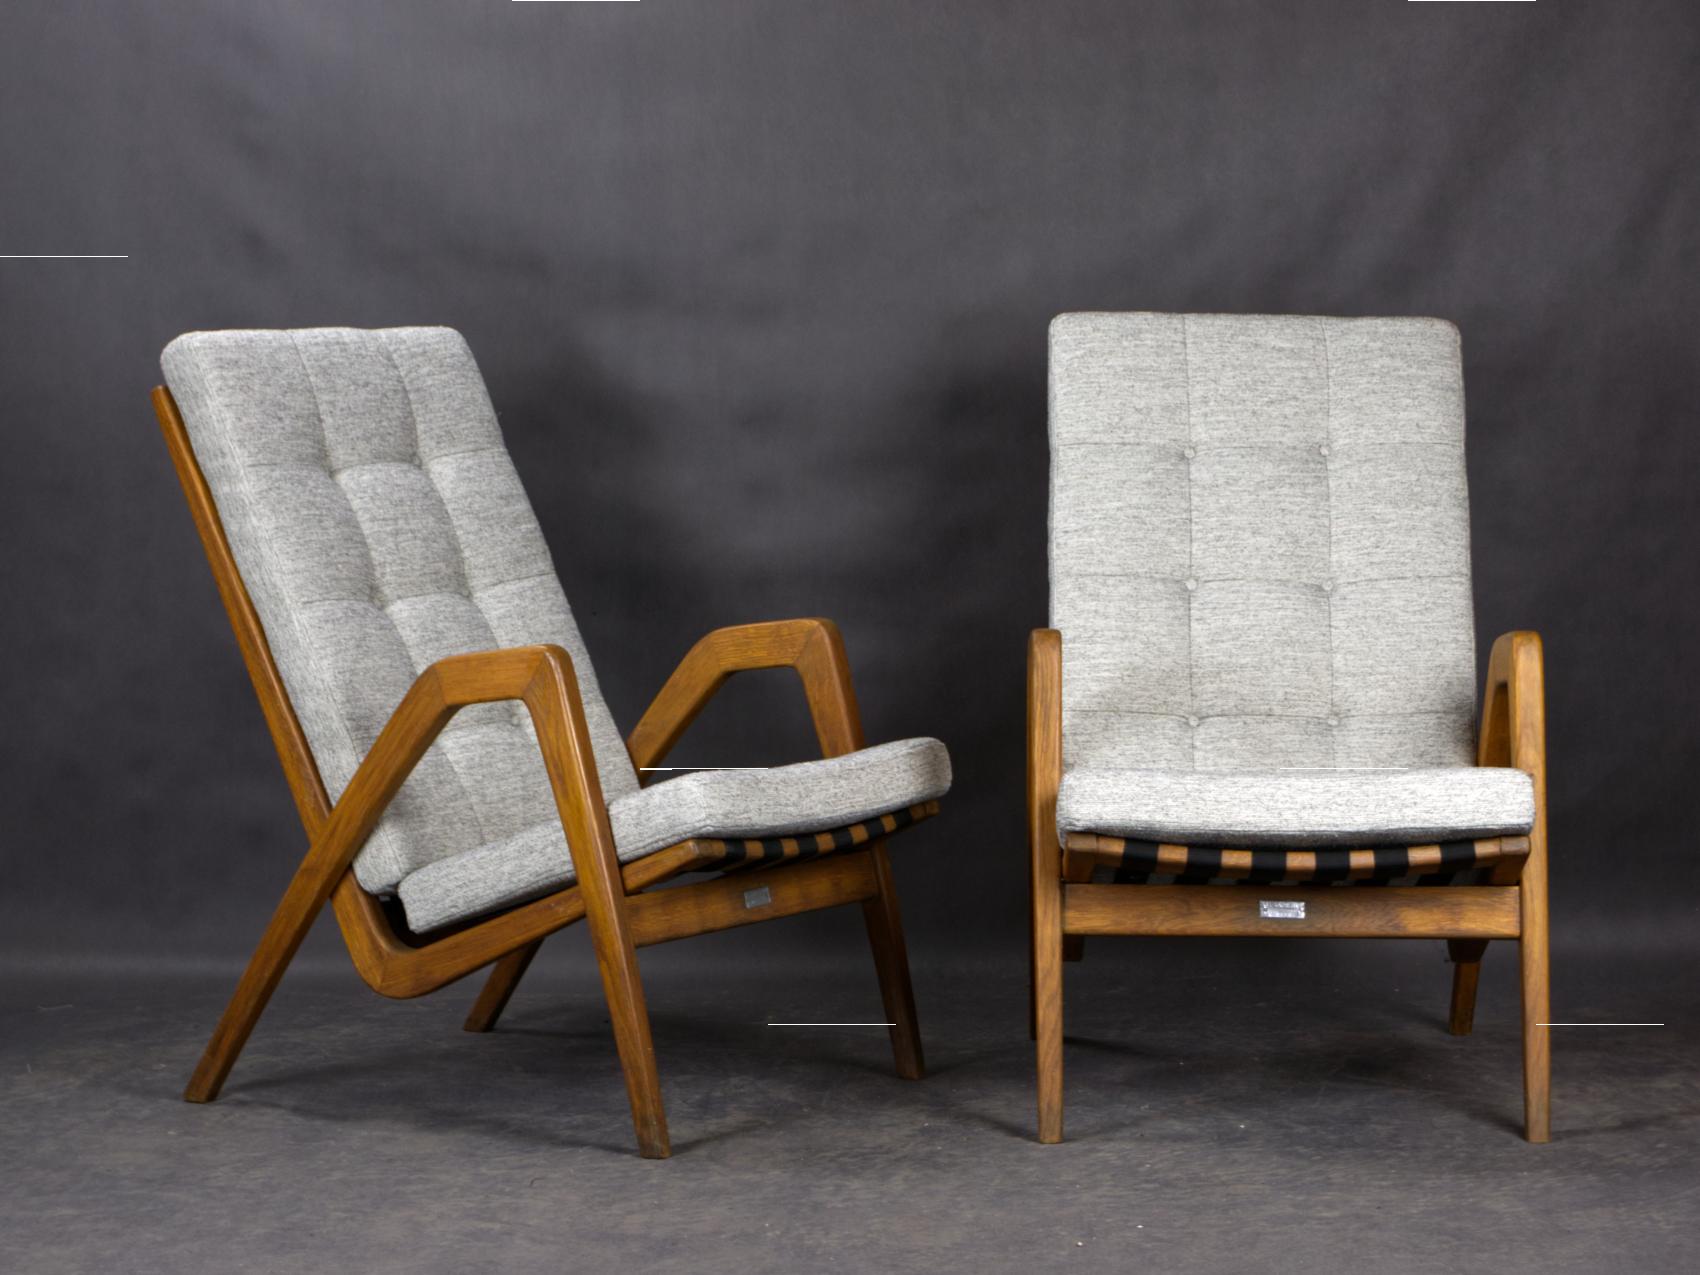 The armchairs were designed in the 1950s by the Czech architect Ján Vanek for the ULUV (headquarters of Folk Art) in Czechoslovakia. The armchairs were in the inventory of Czechoslovak state film (Czechoslovak film studios 1948-1956).
The armchairs